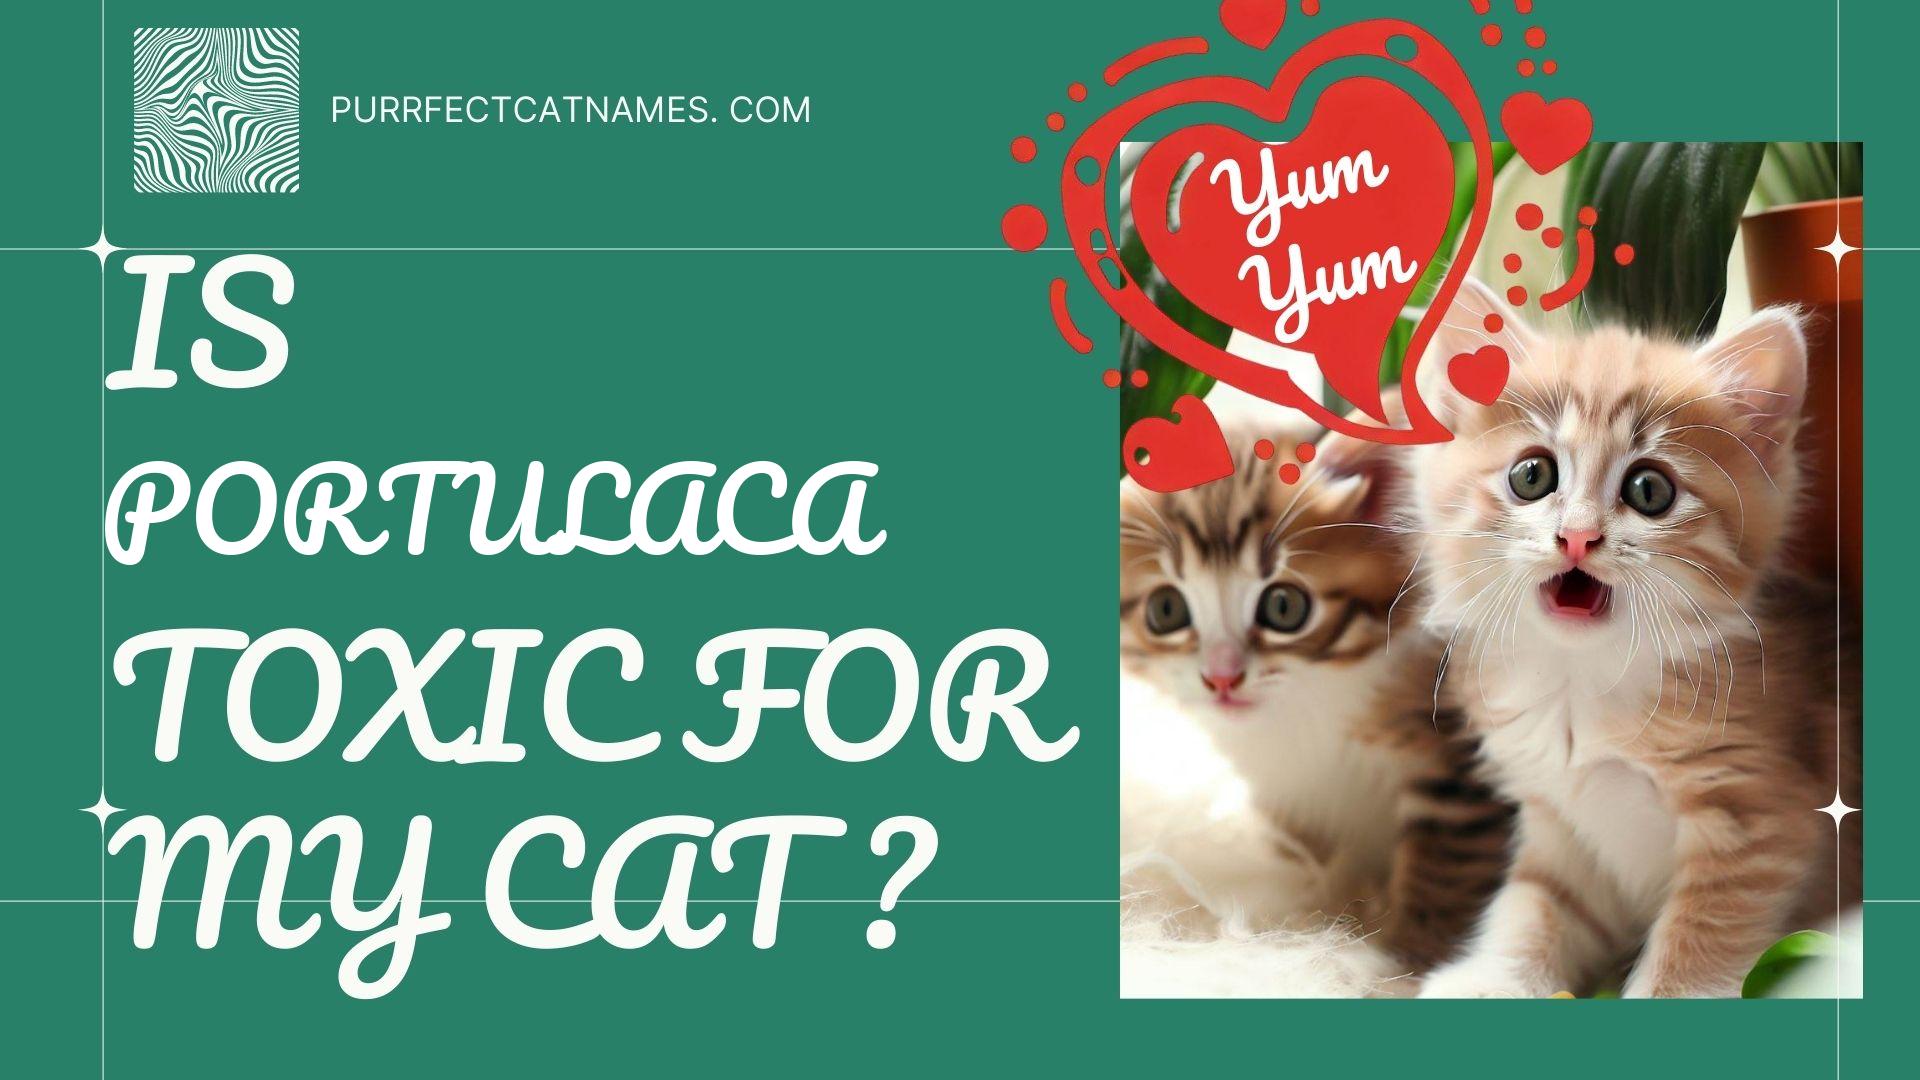 IsPortulaca plant toxic for your cat